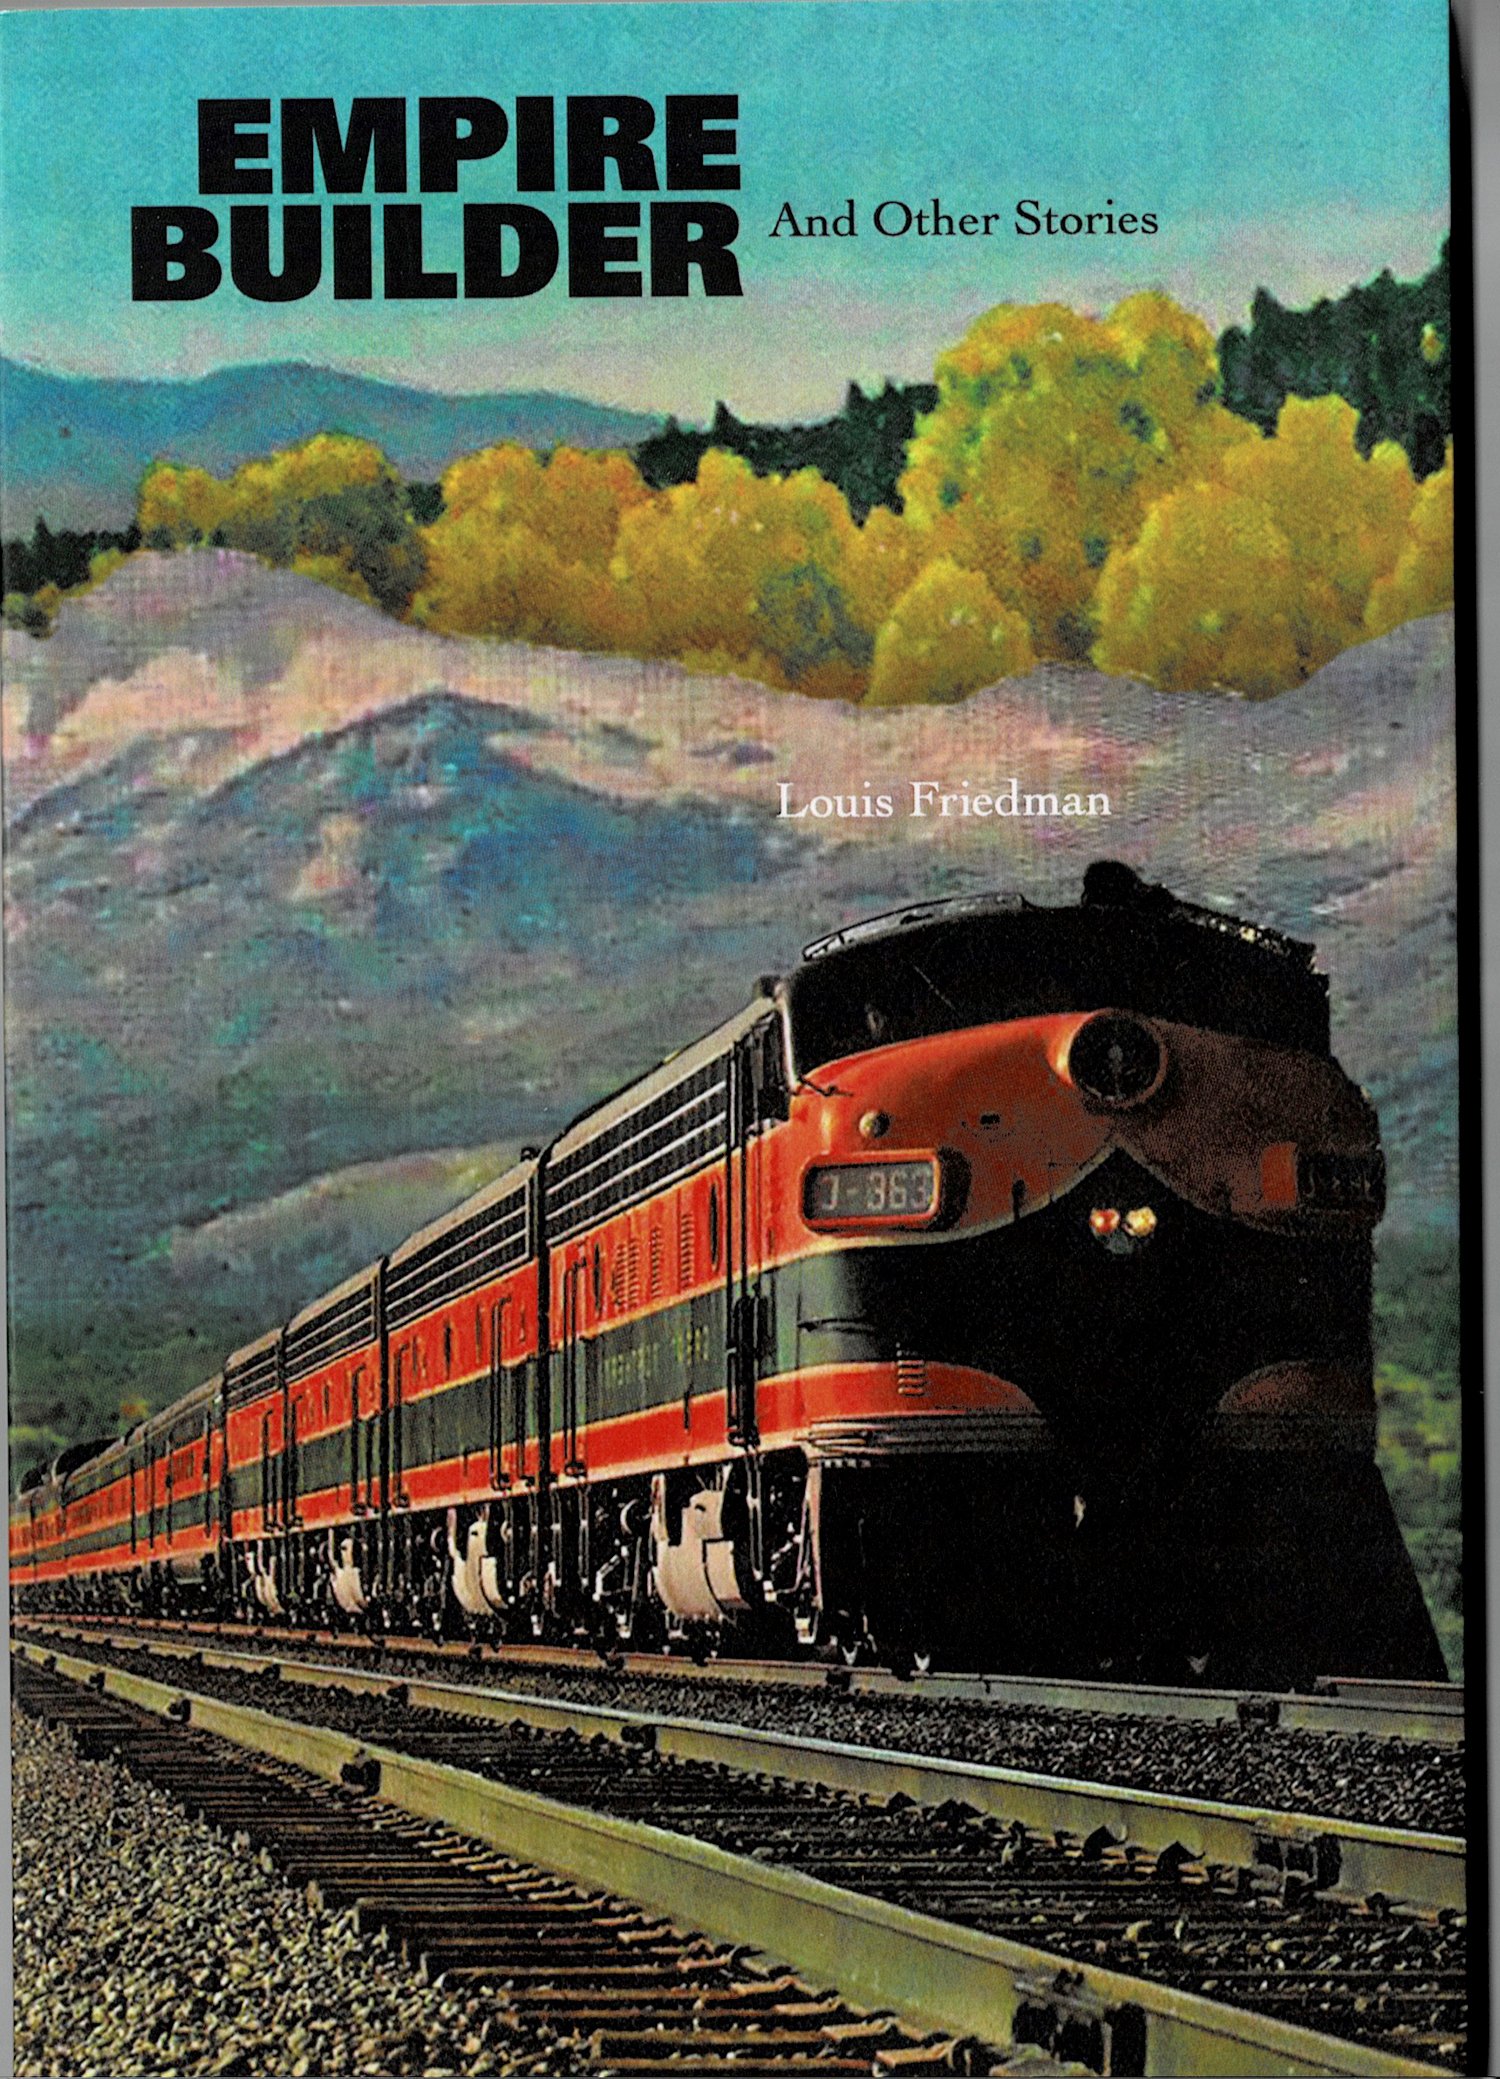 Image of Empire Builder, by Louis Friedman